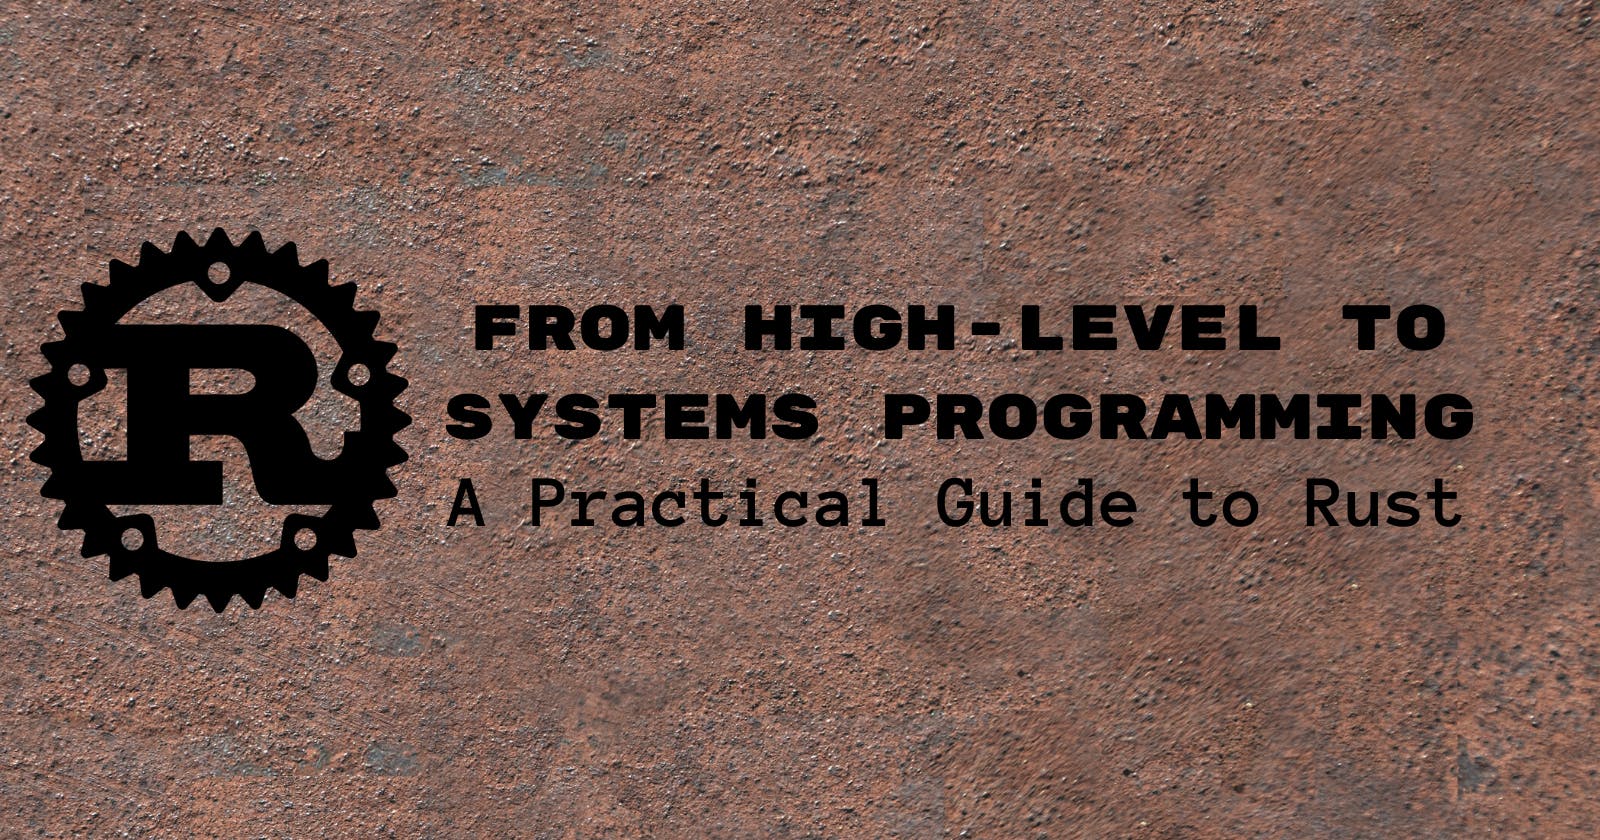 From High-Level to Systems Programming: A Practical Guide to Rust